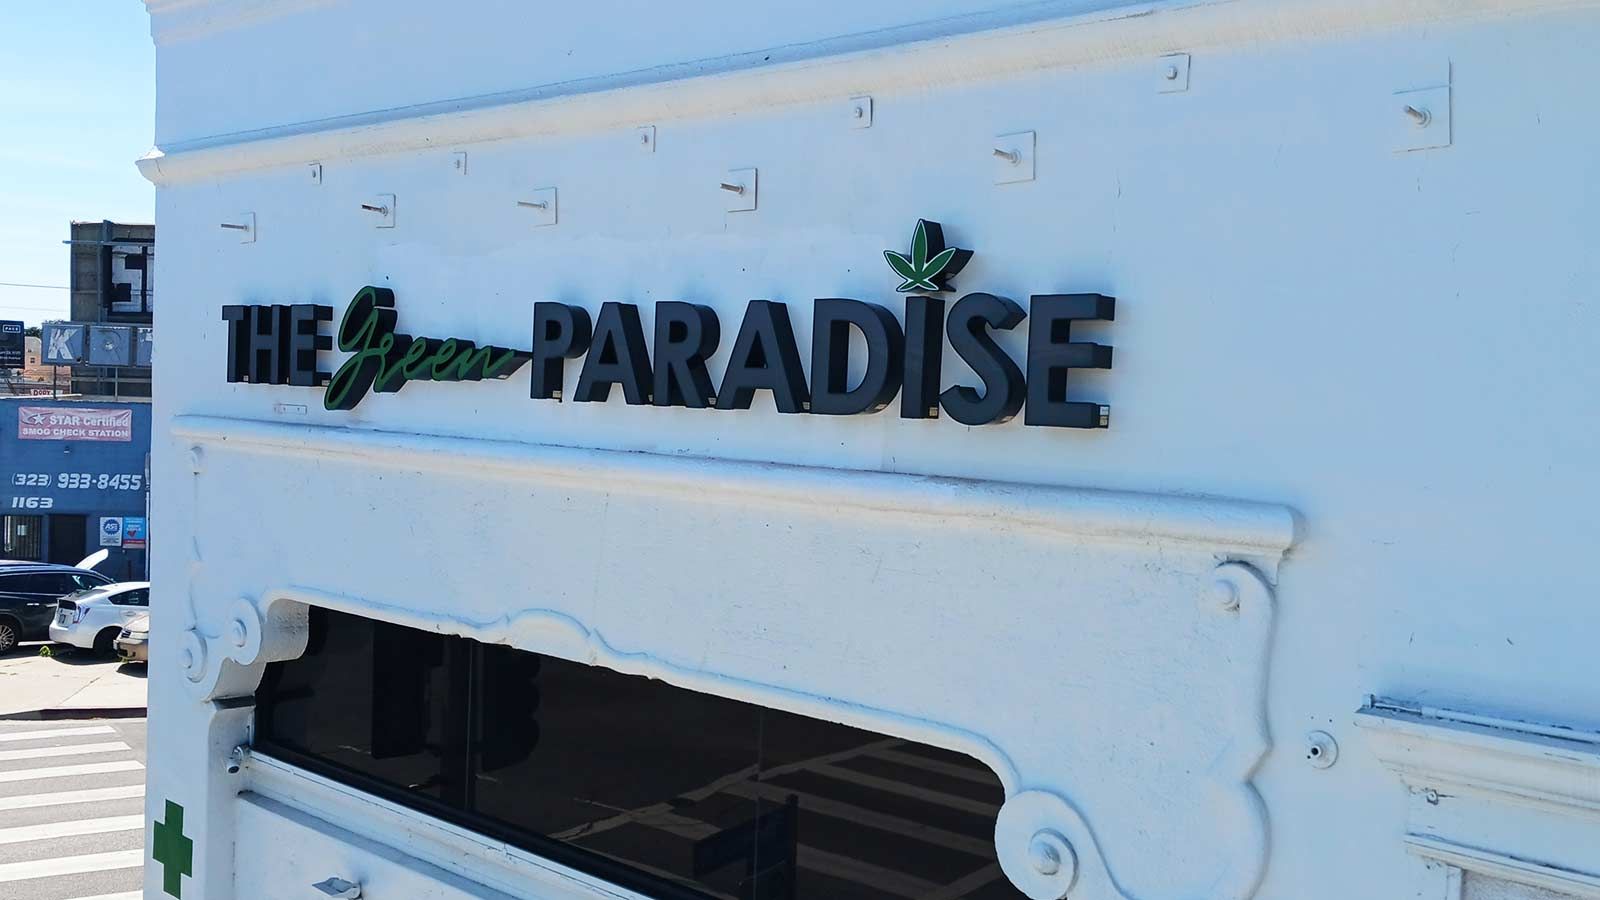 The Green Paradise channel letters mounted on the building